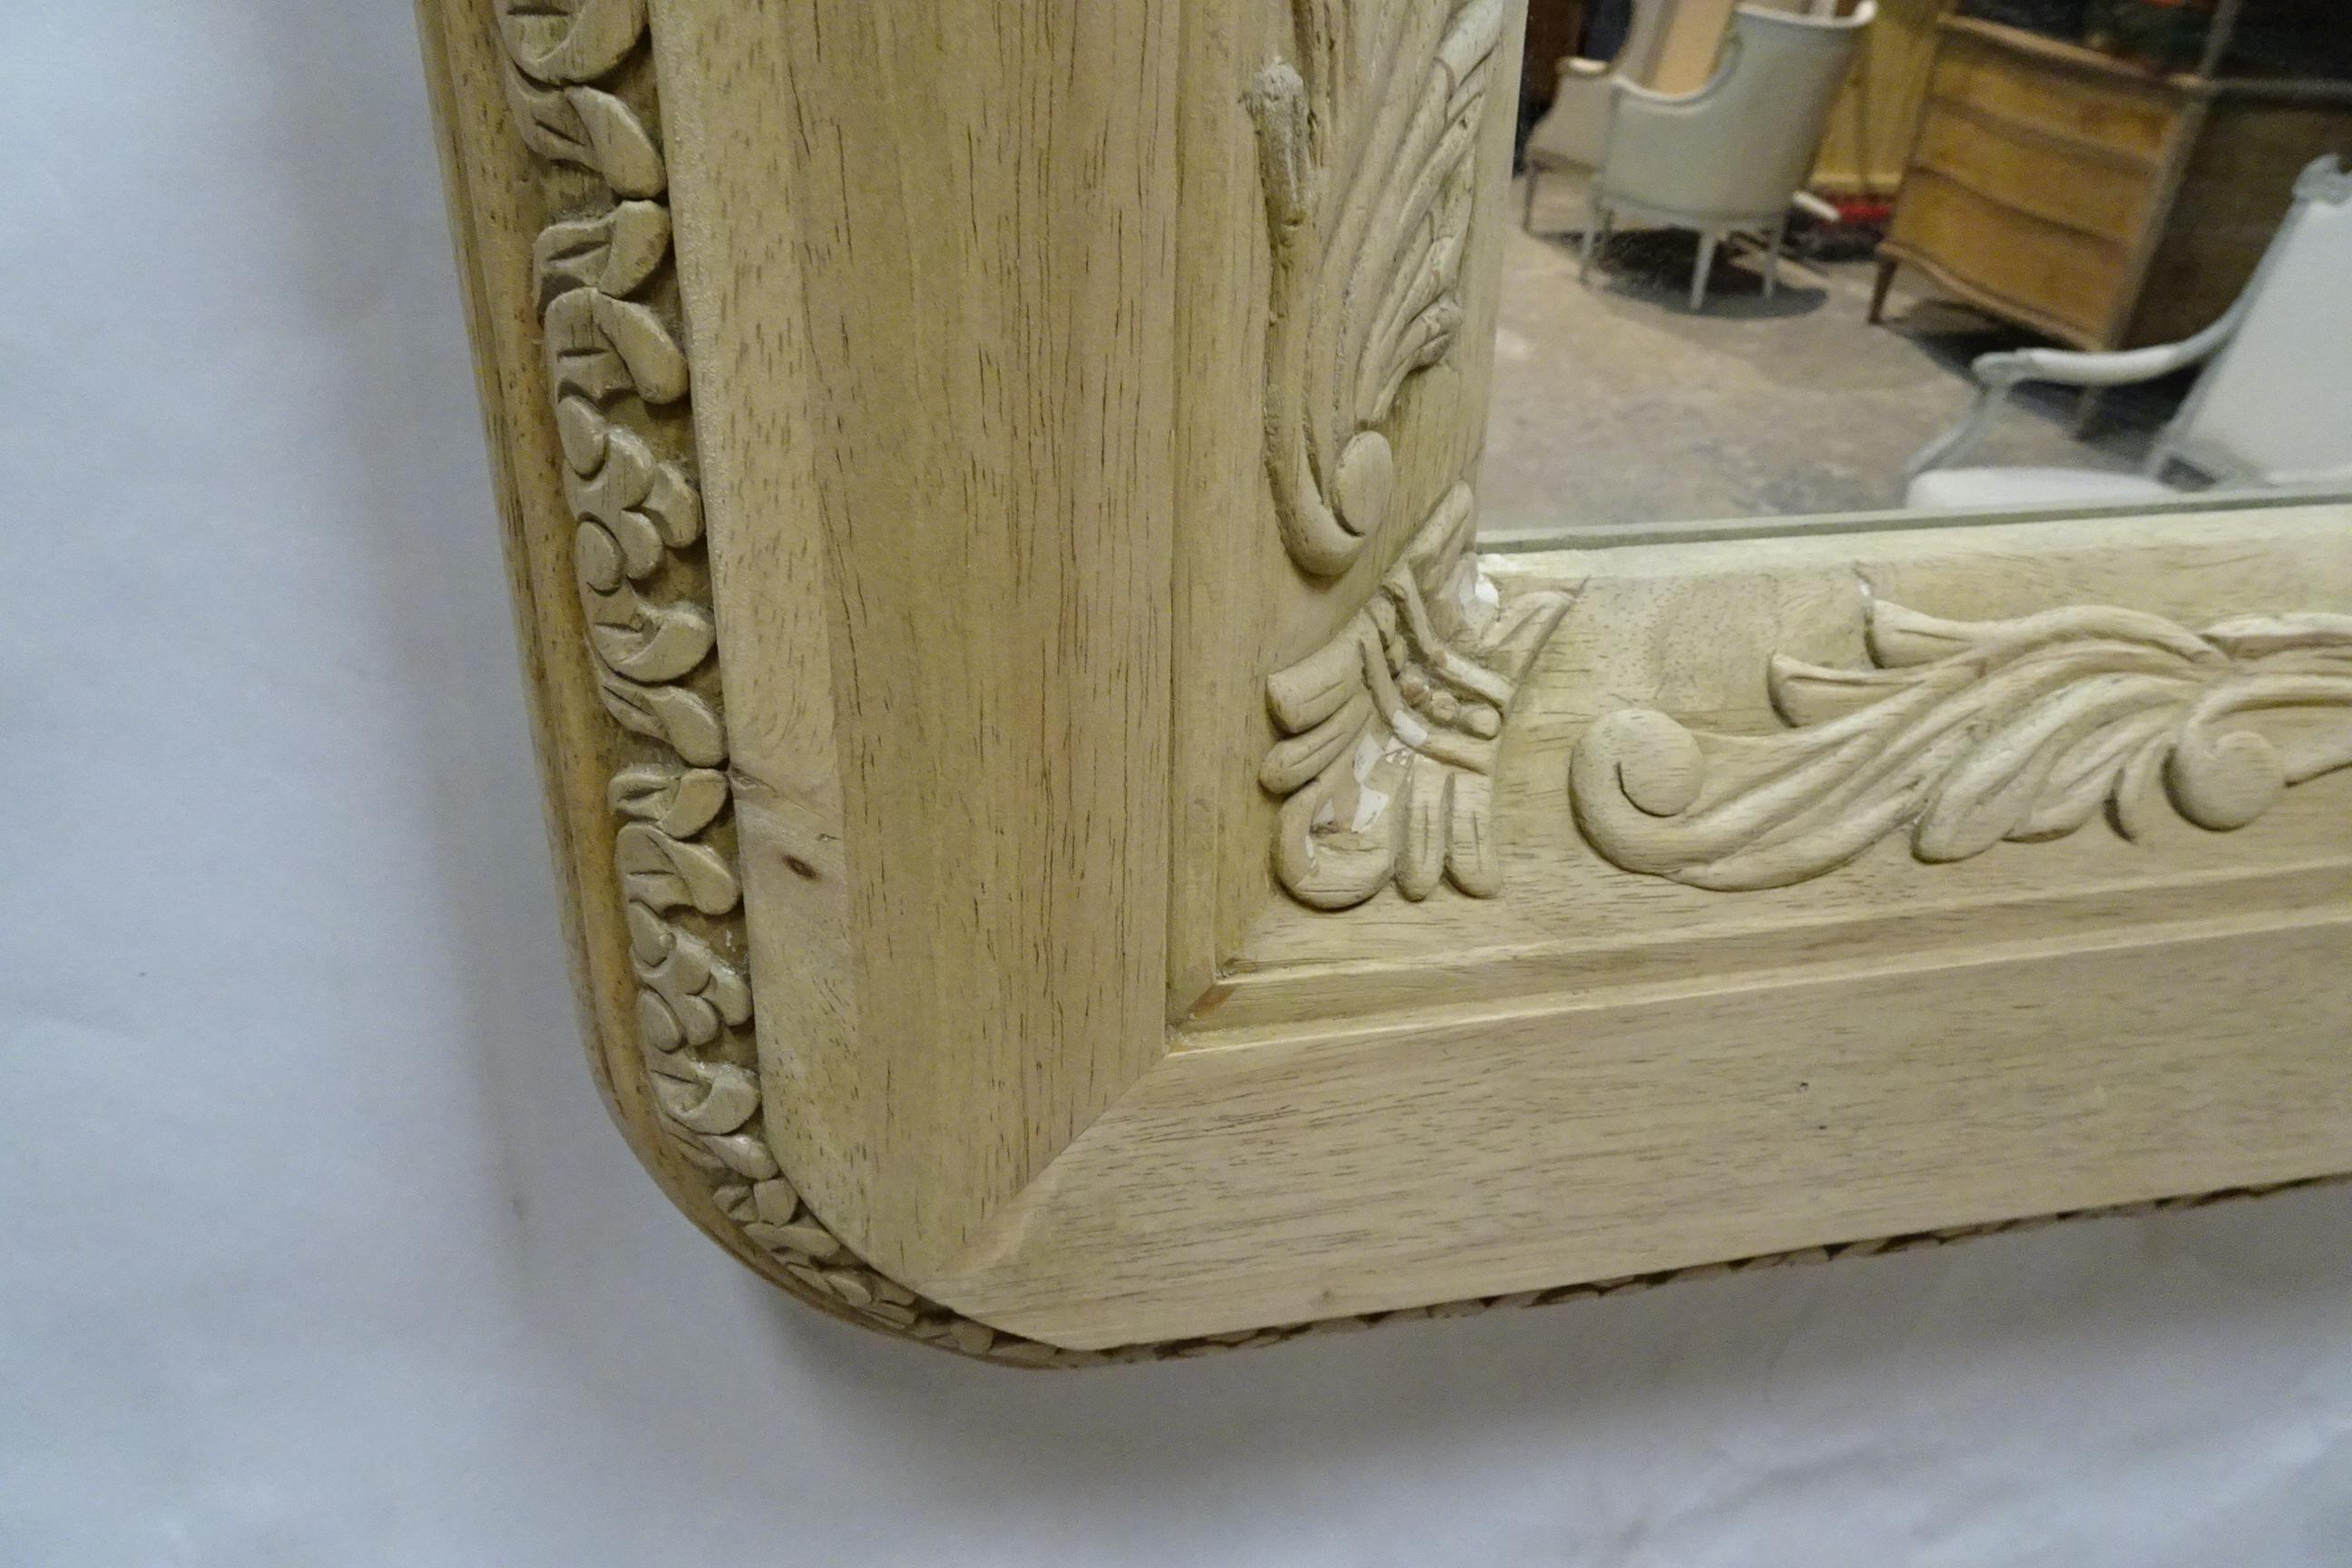 This is a Unique Hand Carved Wall Mirror. it was stained Dark brown and I stripped it down to raw wood and left it that way.